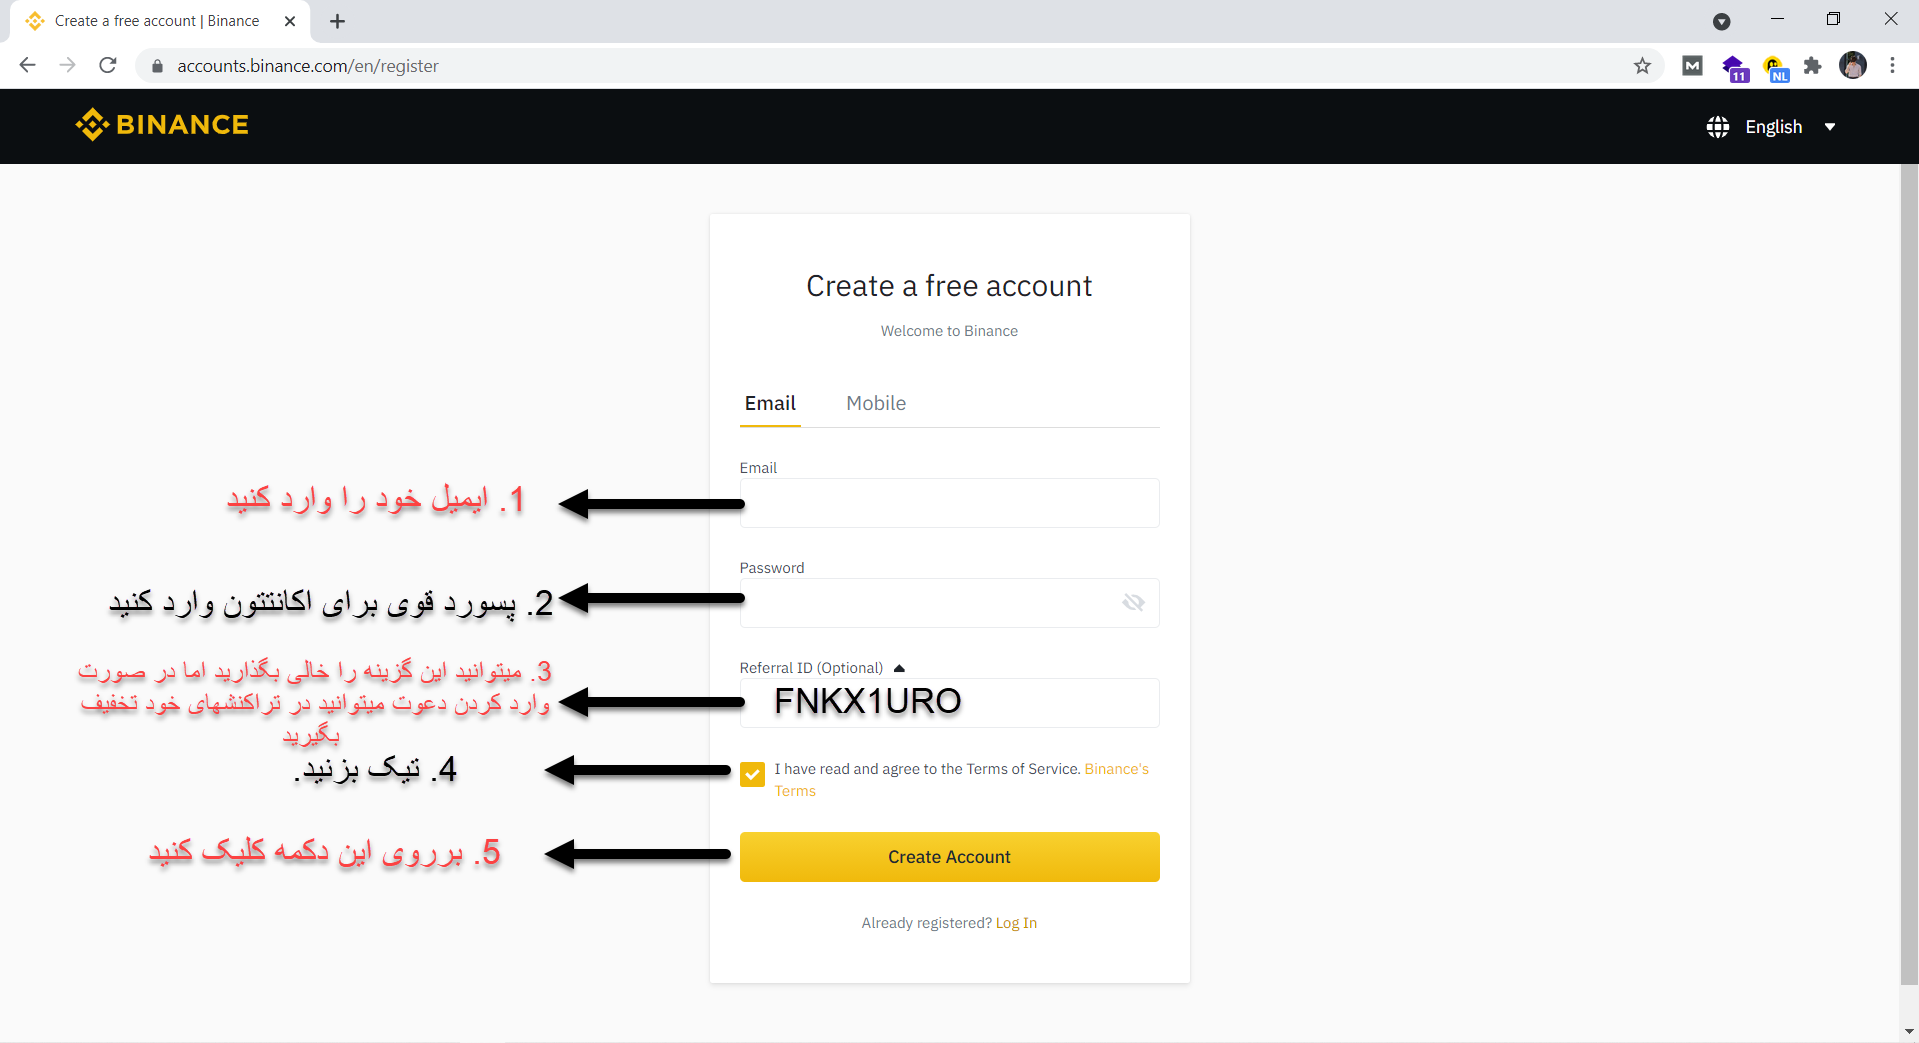 enter your email and pass for binance